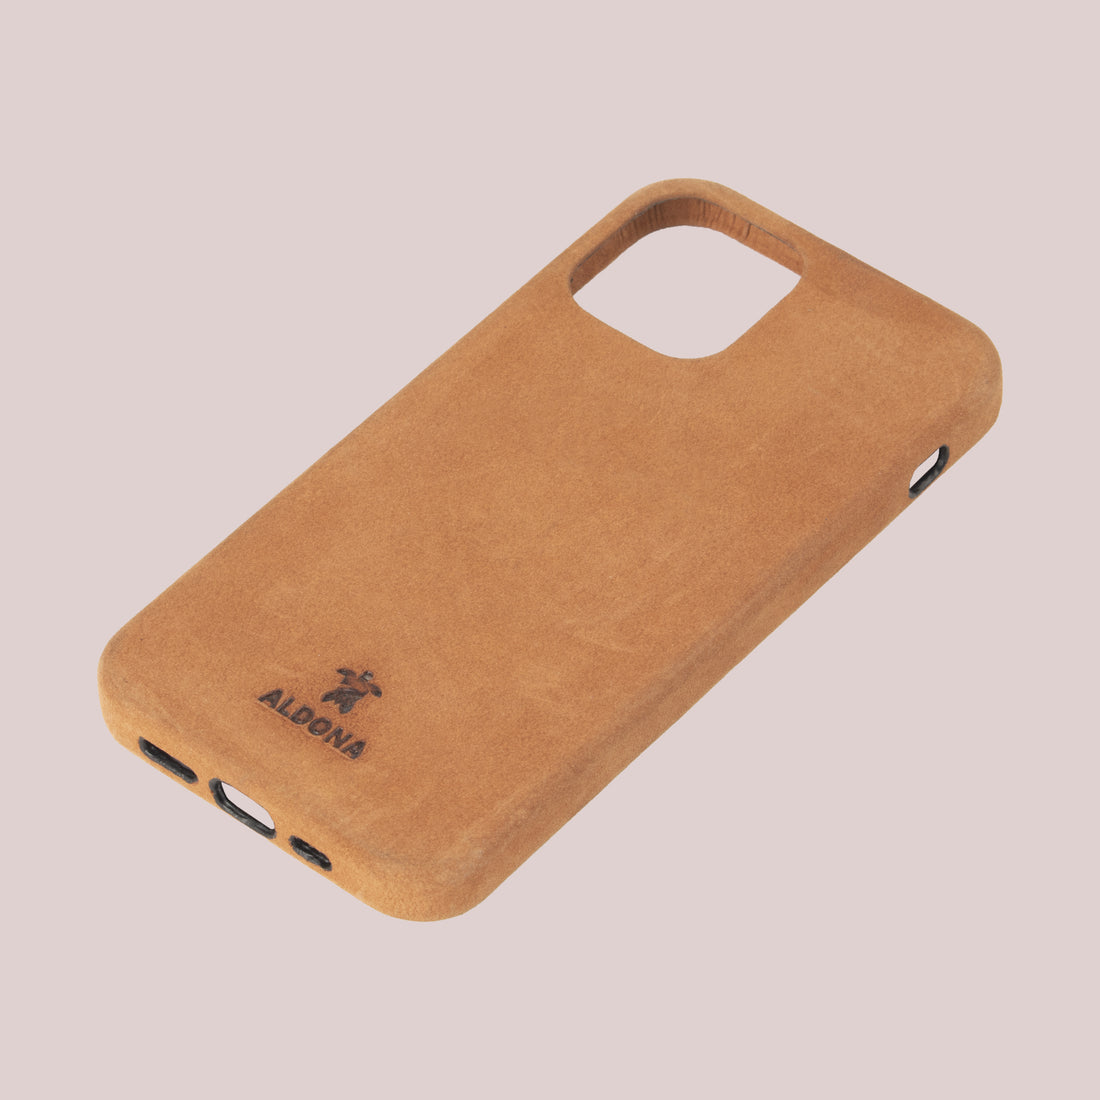 Kalon Case for iPhone 14 series with MagSafe Compatibility - Vintage Tan